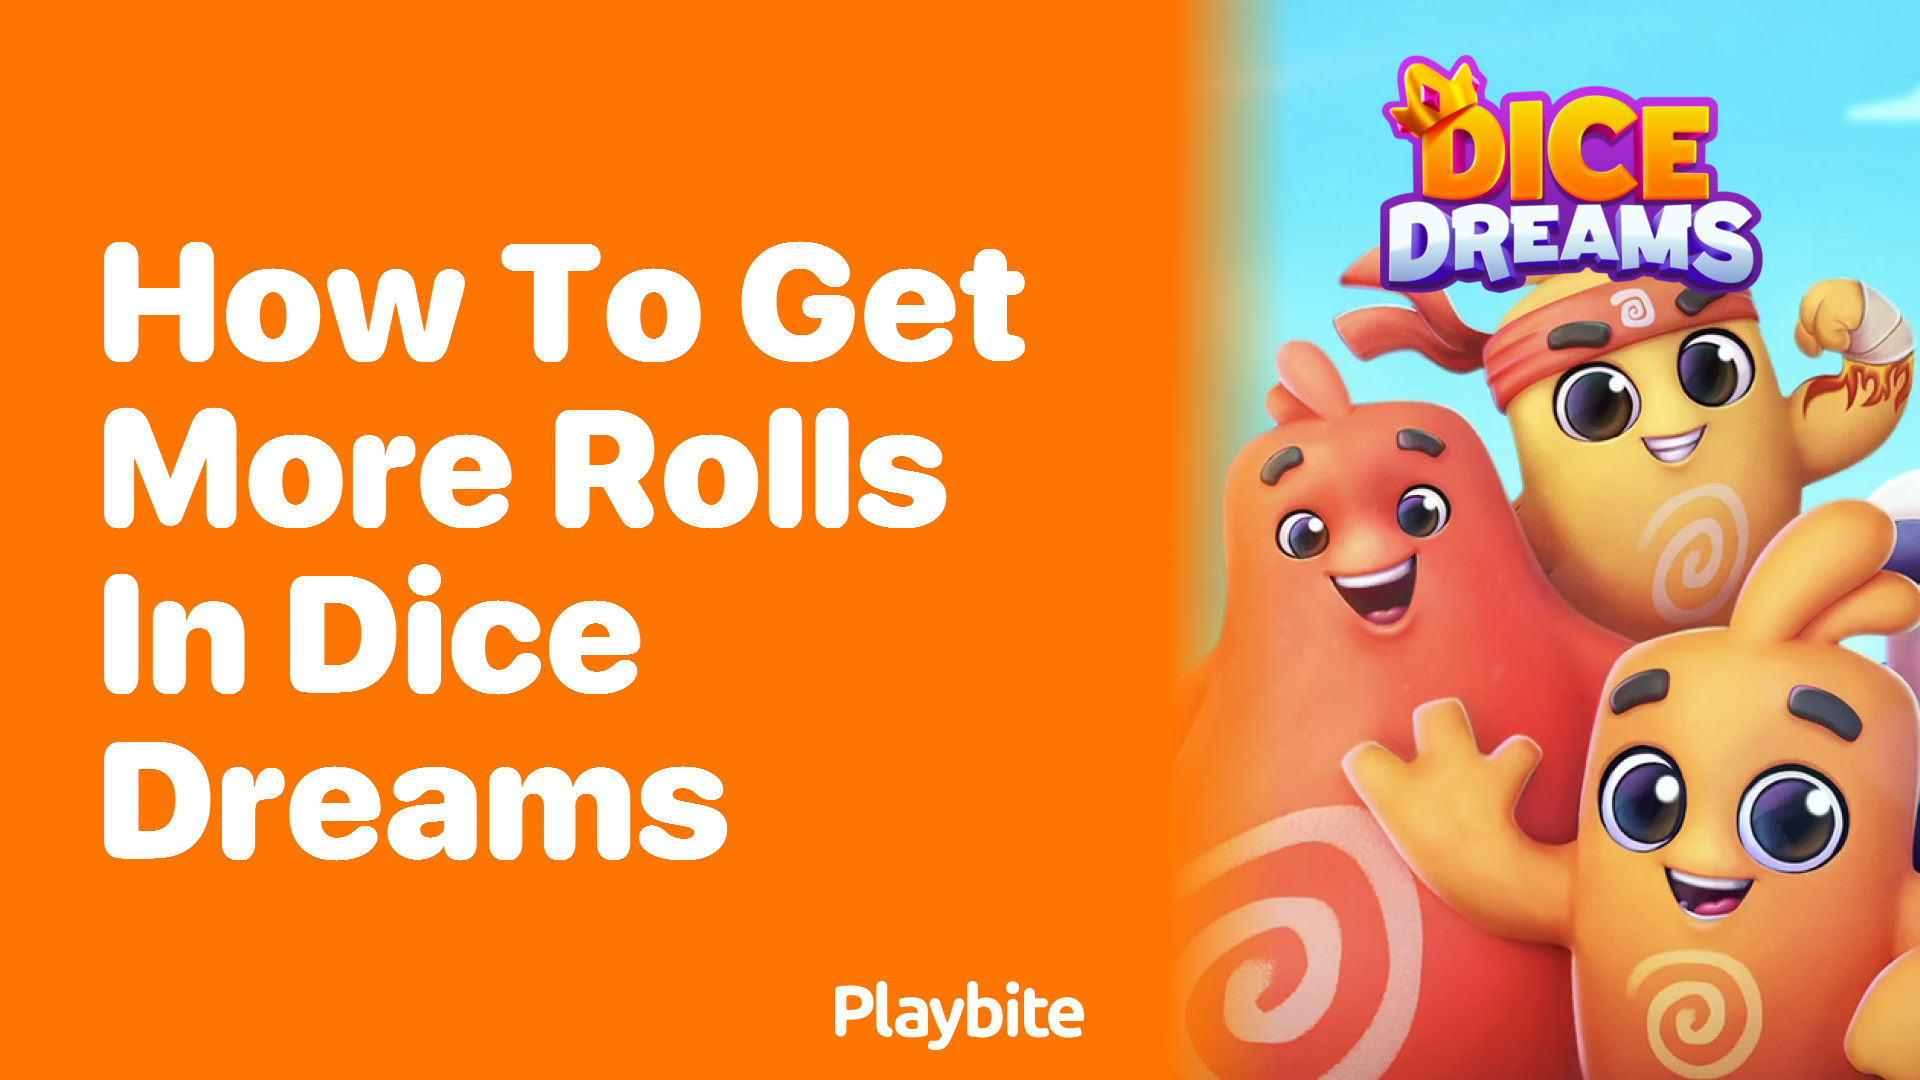 How to Get More Rolls in Dice Dreams